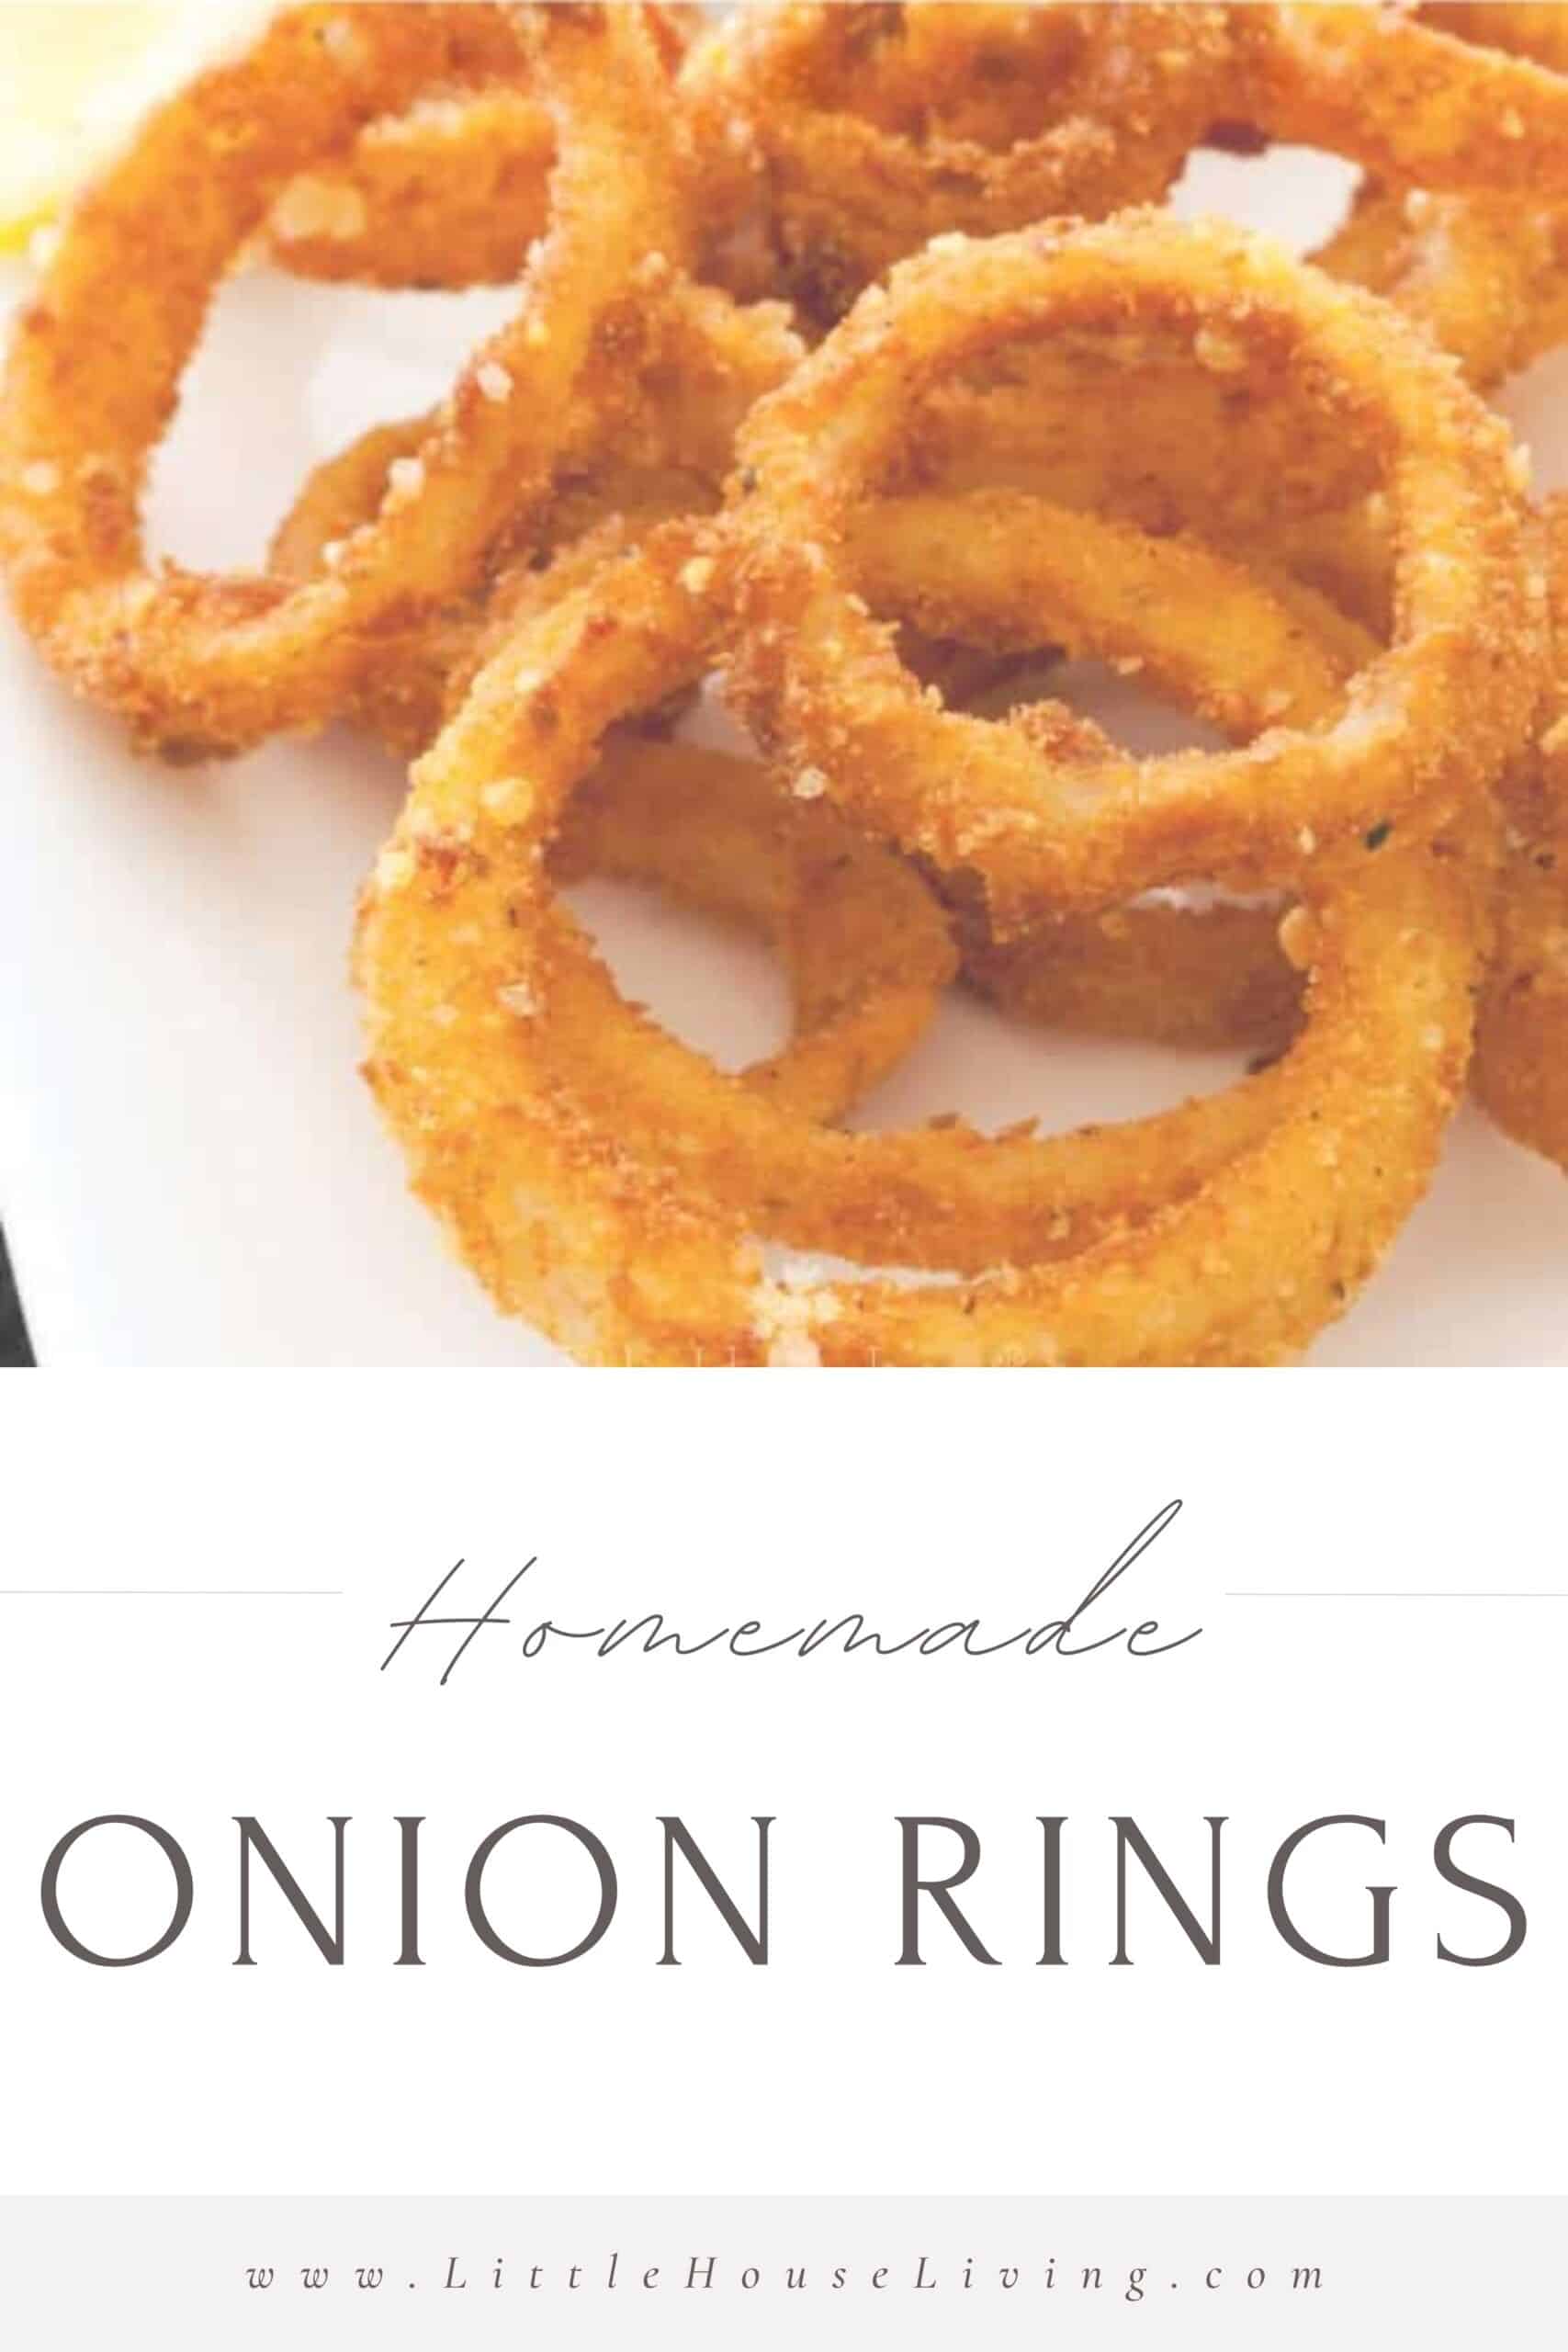 Do you love onion rings? Learn to make Homemade Onion Rings at home, from scratch, that are just as good (or better) than the ones you love from the restaurant!